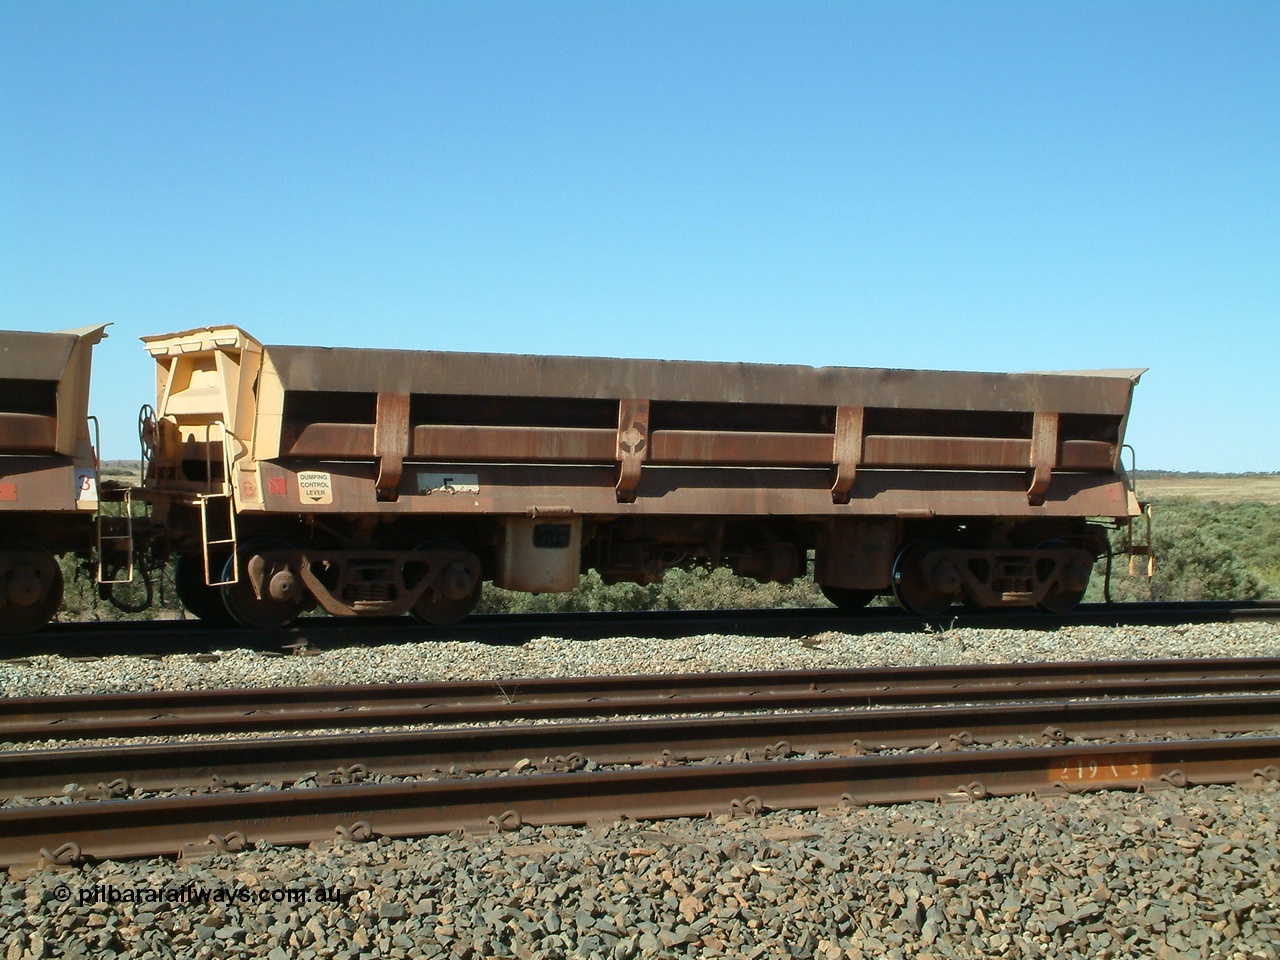 040810 145007
Shaw Siding backtrack, Difco Ohio USA 1967 build short side dump waggon 5, originally built for Goldsworthy Mining, but not yet renumbered by BHP Iron Ore, it should be 8705, one five waggons built for Goldsworthy Mining.
Keywords: Difco-Ohio-USA;GML;BHP-ballast-waggon;